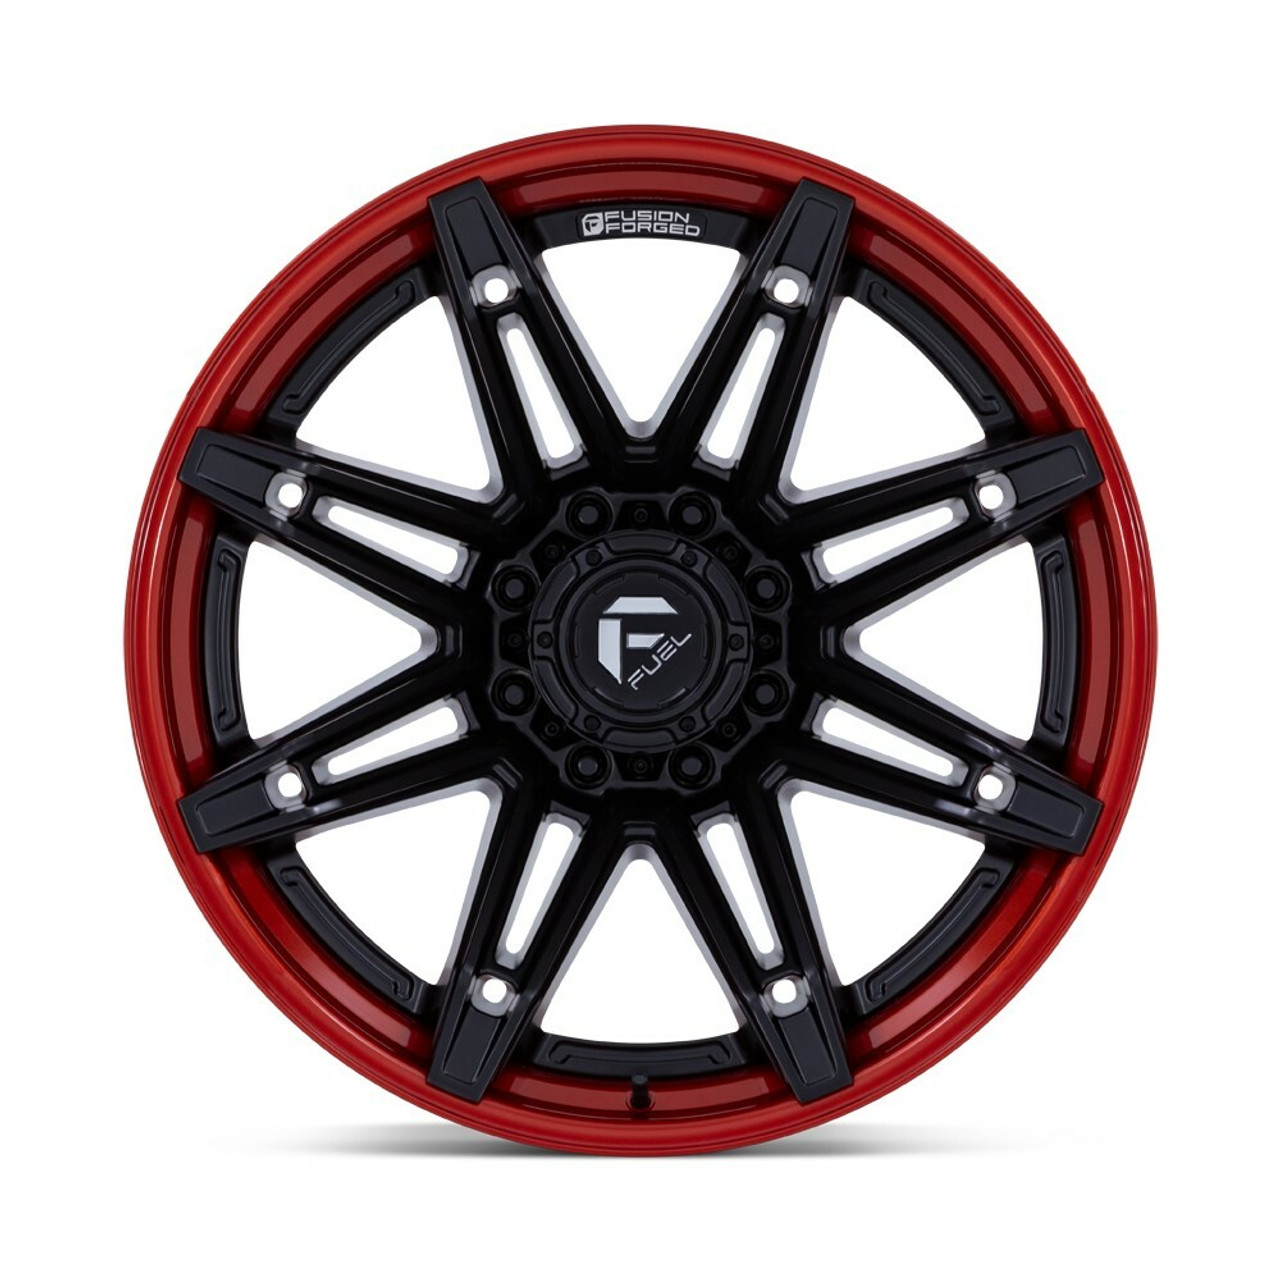 Fuel FC401 Brawl 20x10 8x180 Matte Black Candy Red Lip 20" -18mm For Chevy GMC